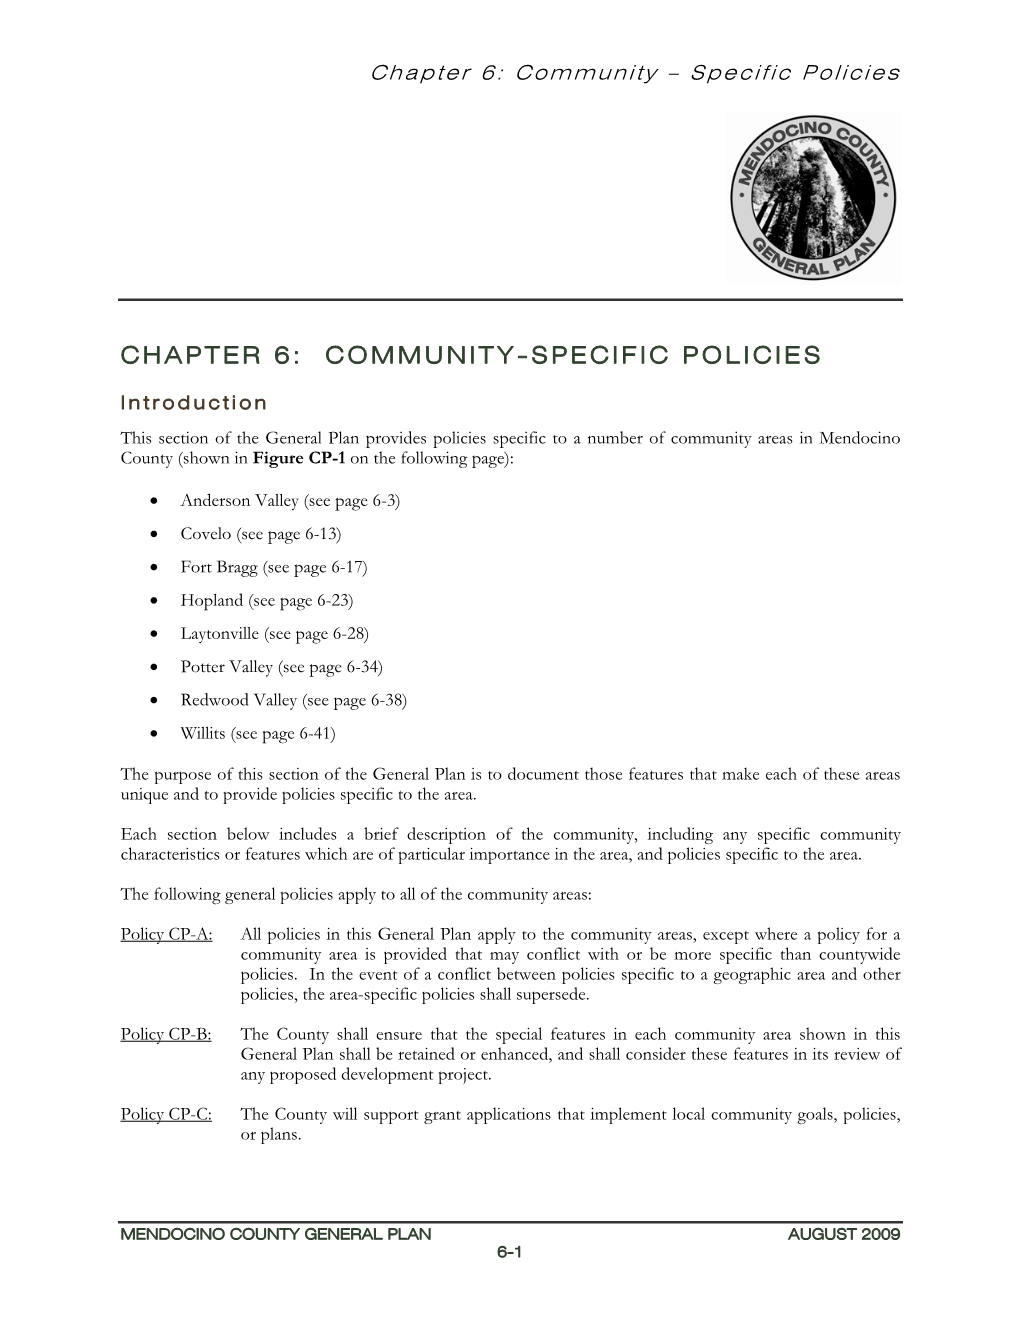 Chapter 6: Community-Specific Policies